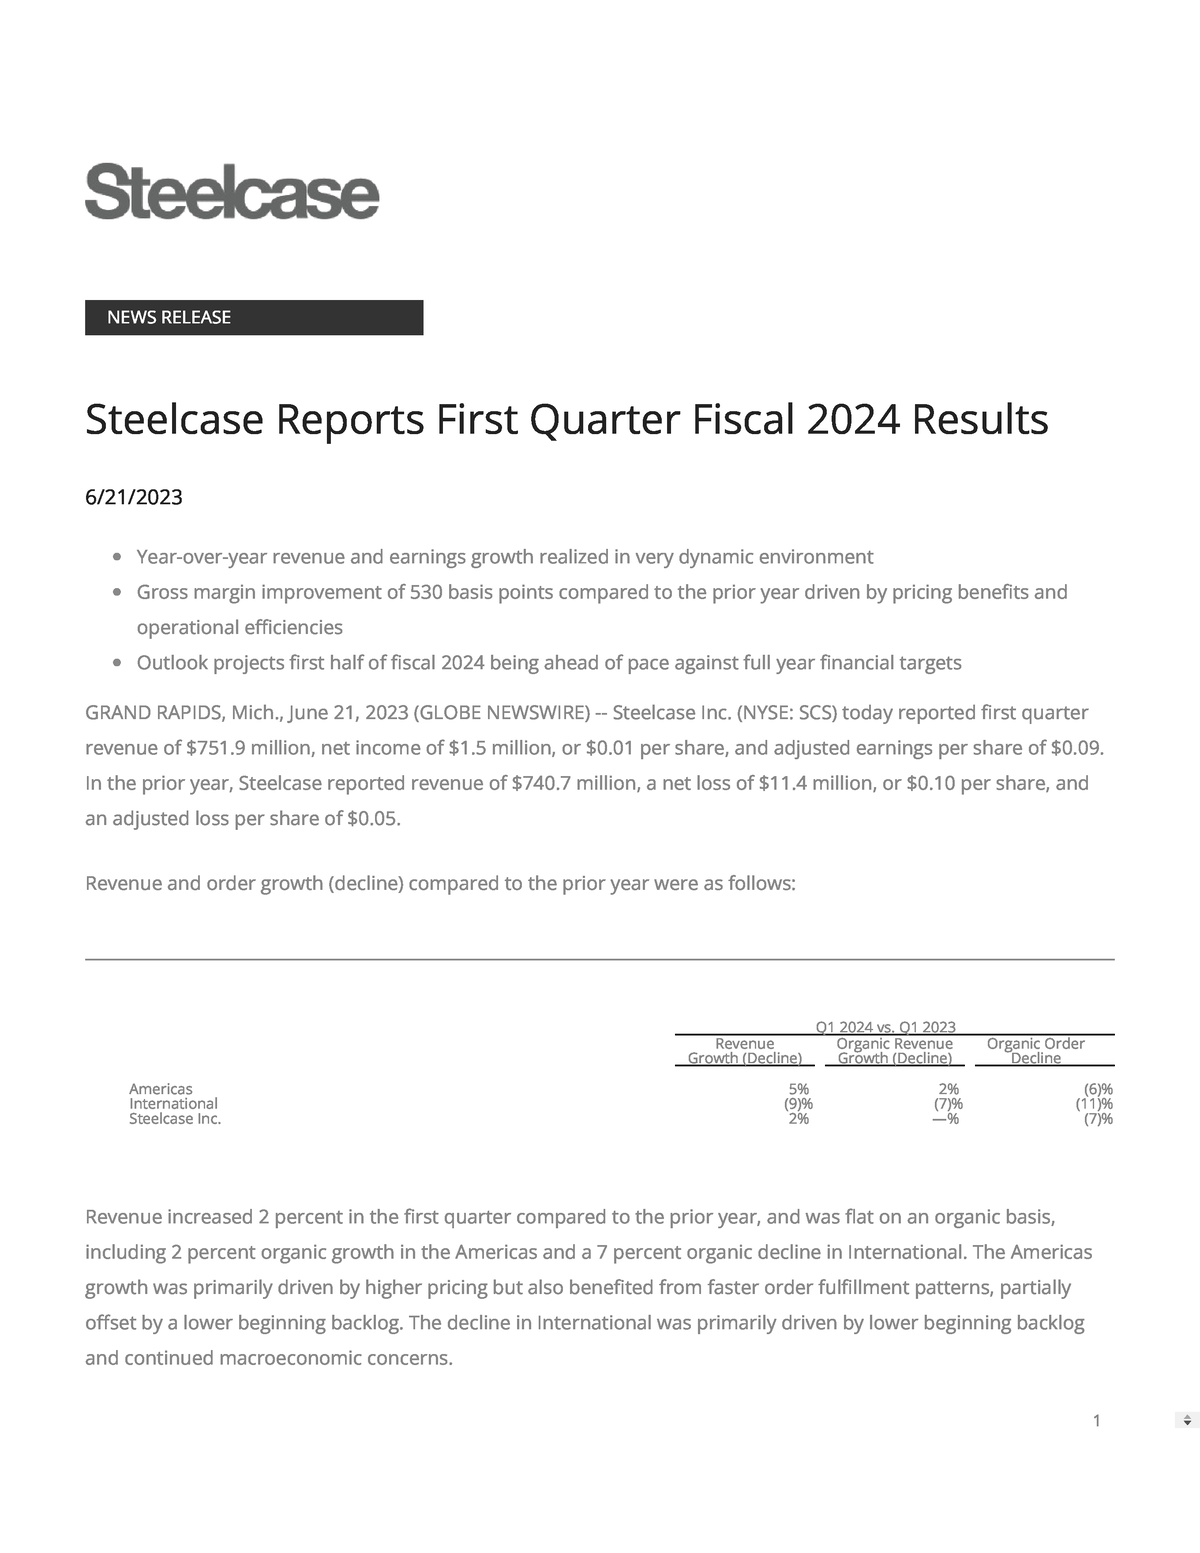 Steelcase Reports First Quarter Fiscal 2024 Results 2023 hons